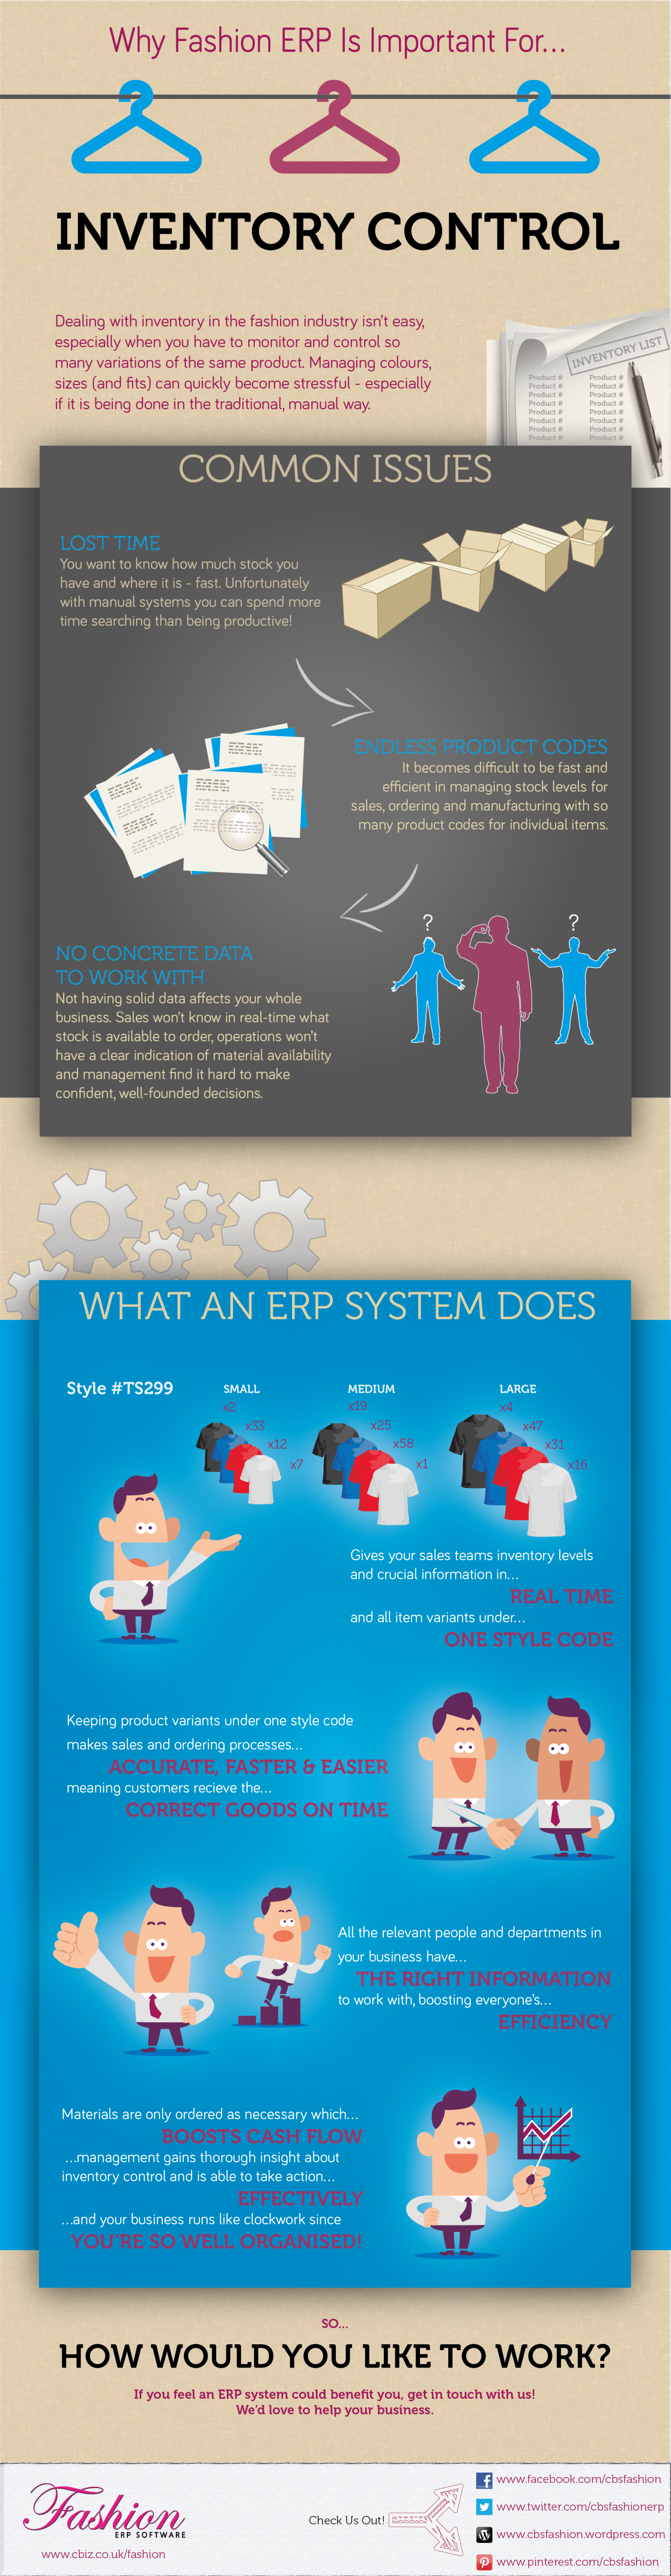 Fashion ERP for Inventory Control Infographic